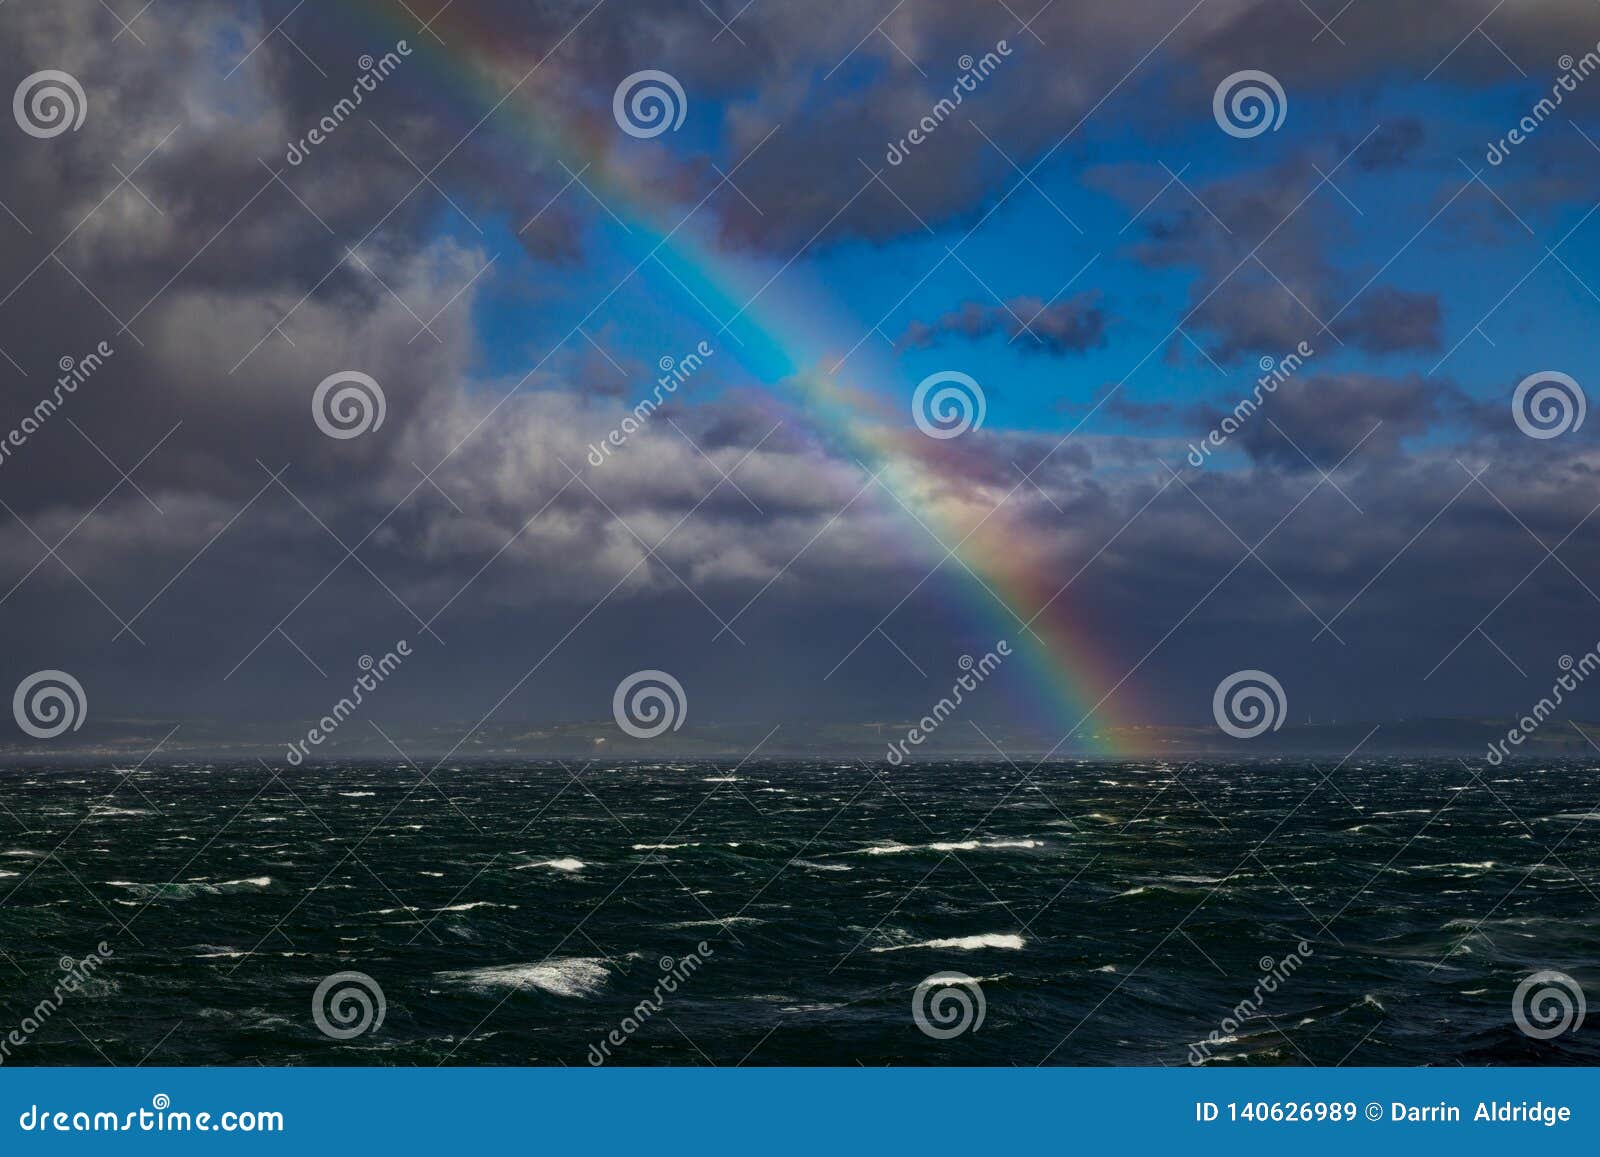 rainbow over rough seas in the english channel